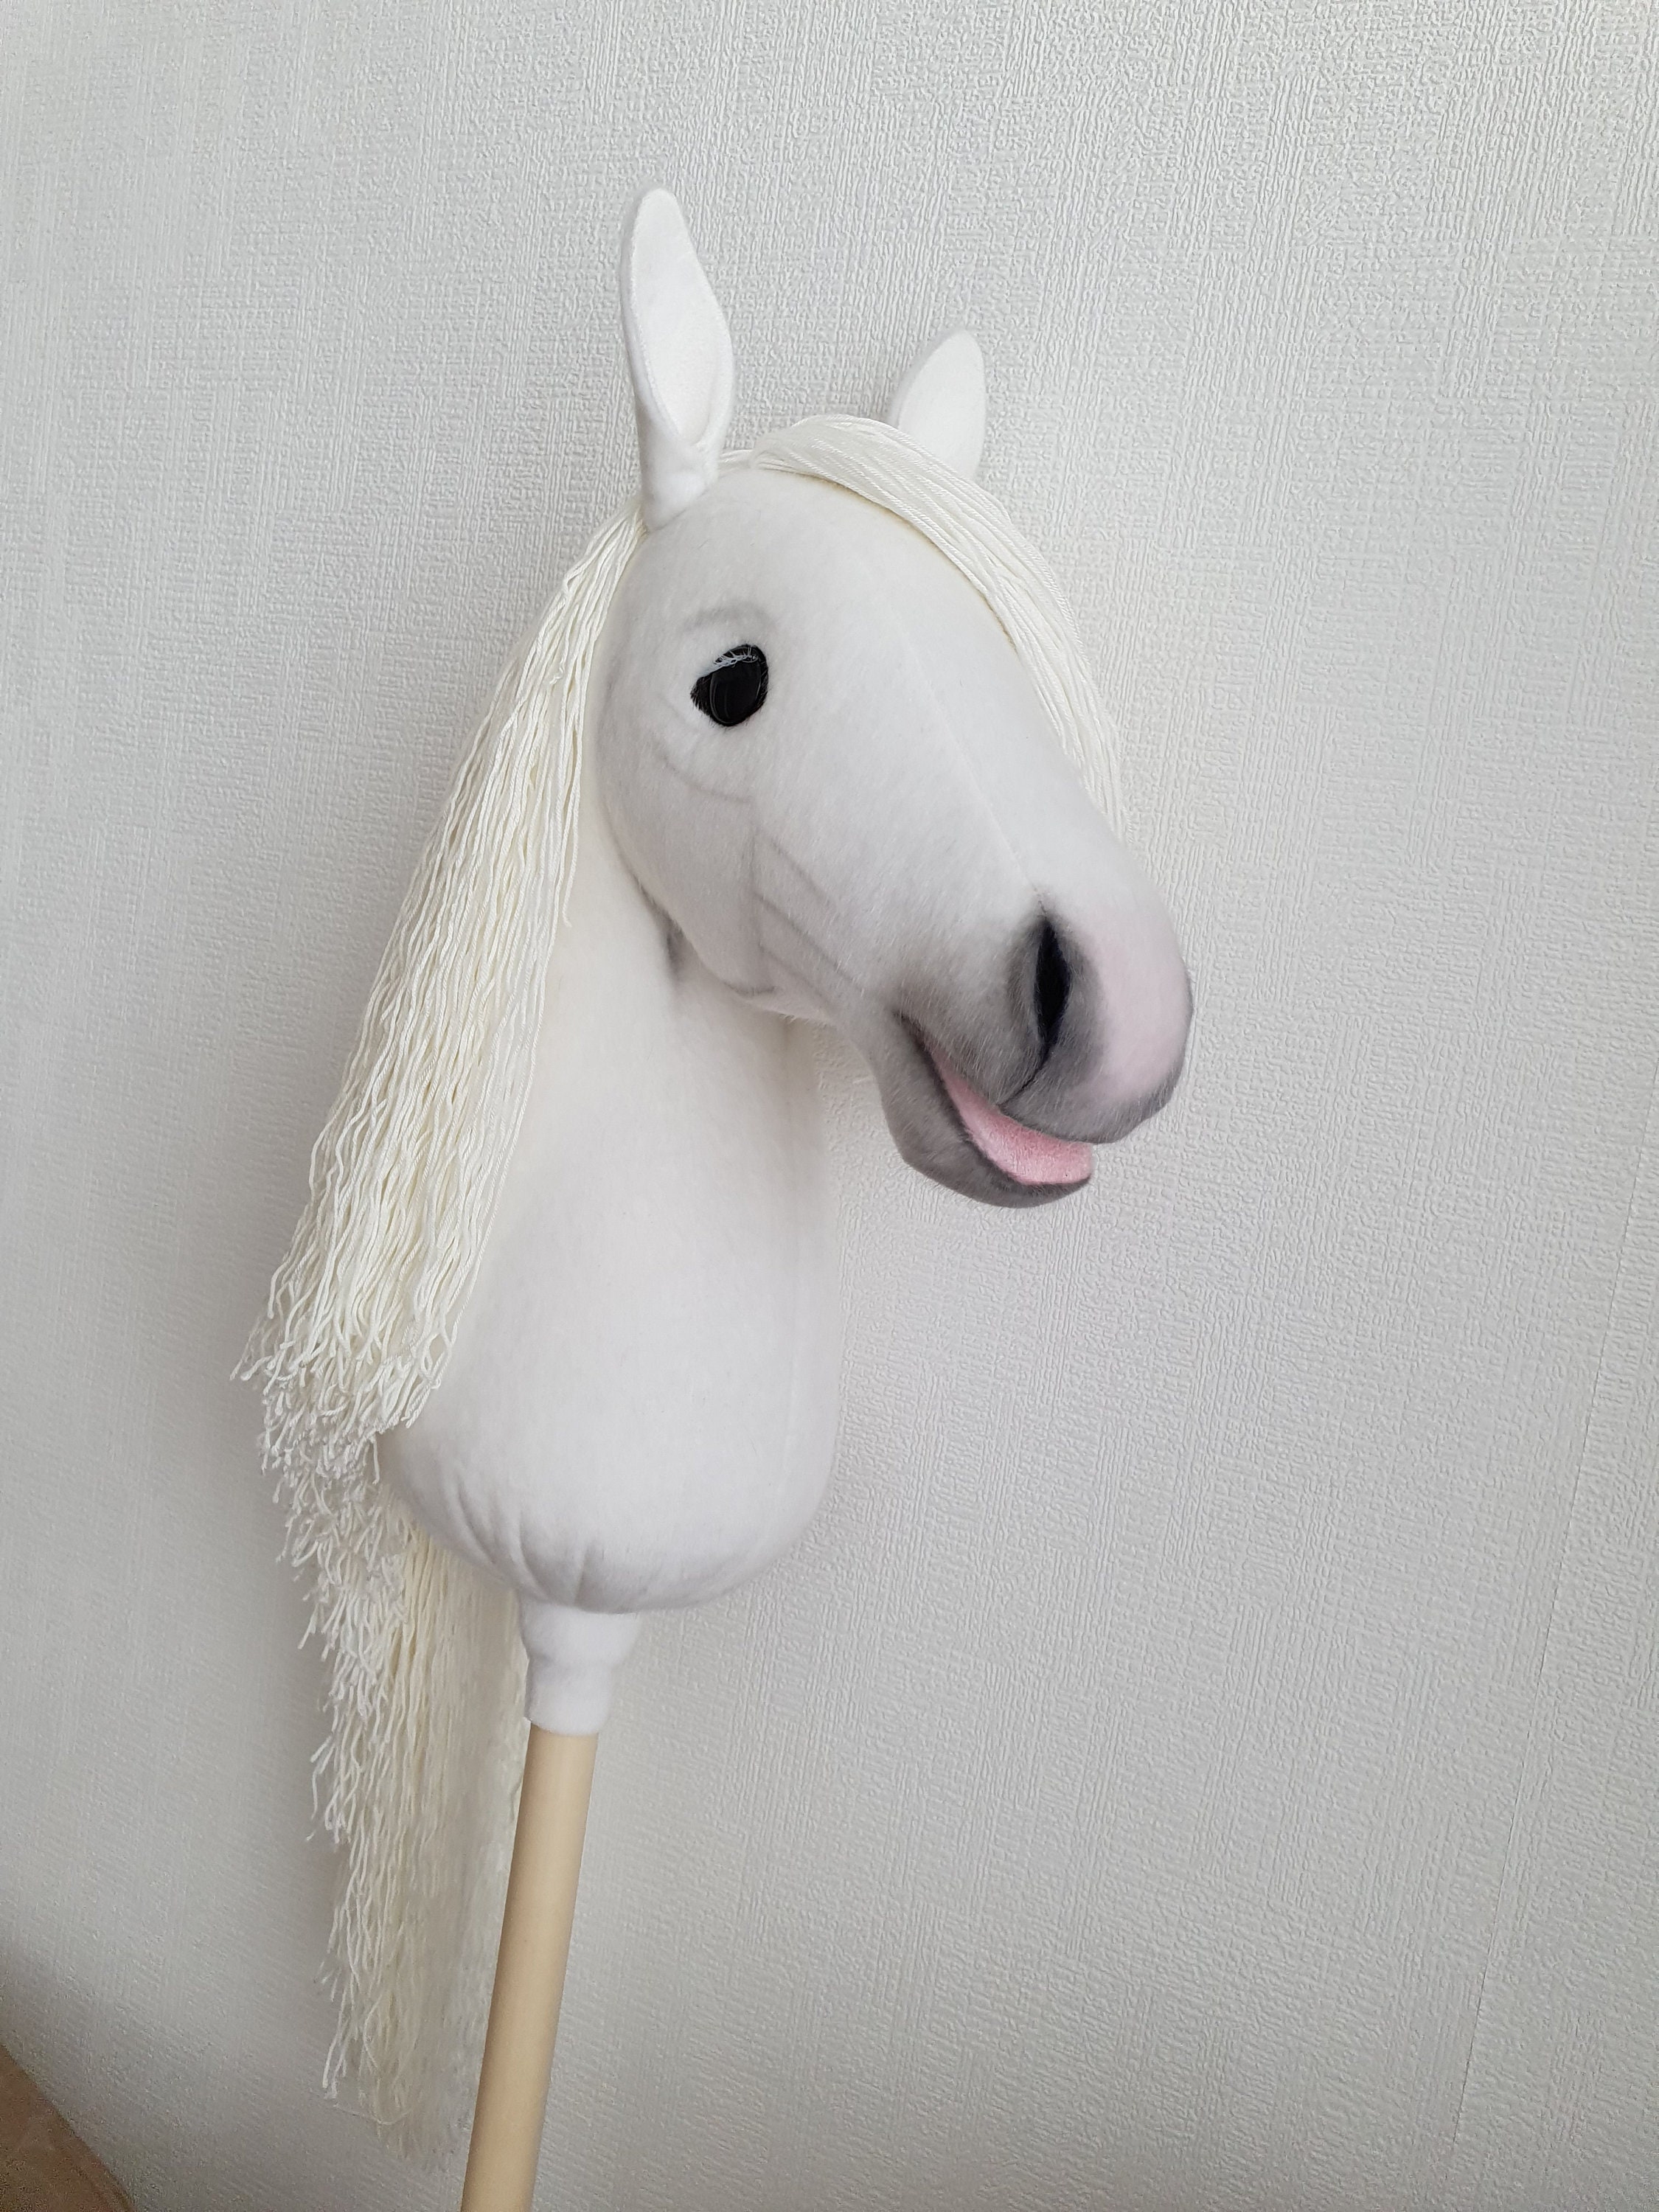 White Hobby Horse on a Stick Leather Bridle With Nameplate Halter Comb  Brush Carrot Equine Passport for Hobbyhorsing 